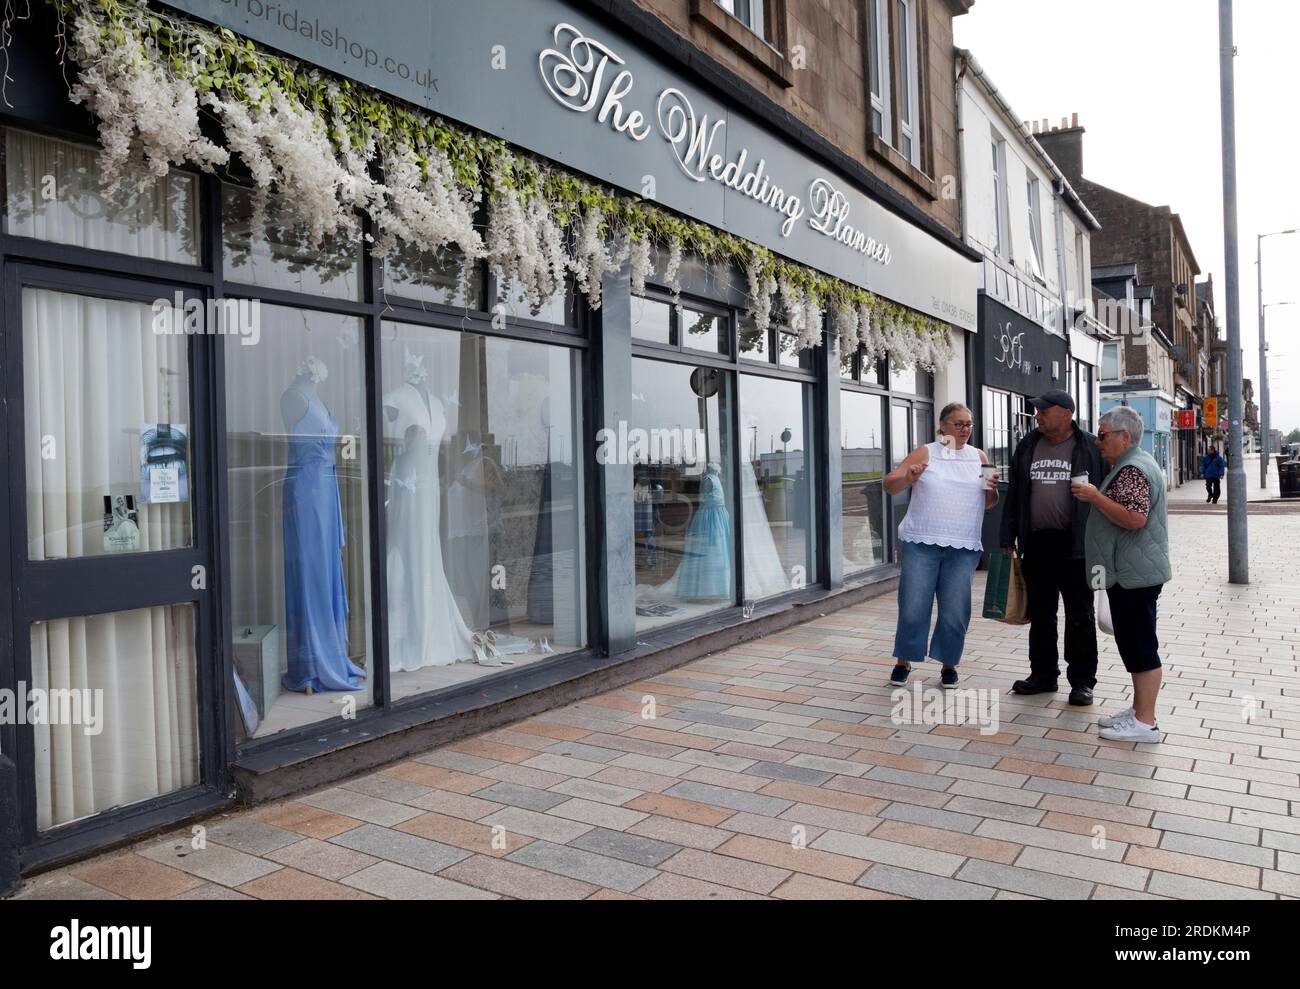 The Wedding Planner on West Clyde Street, Helensburgh, Scotland Stock Photo